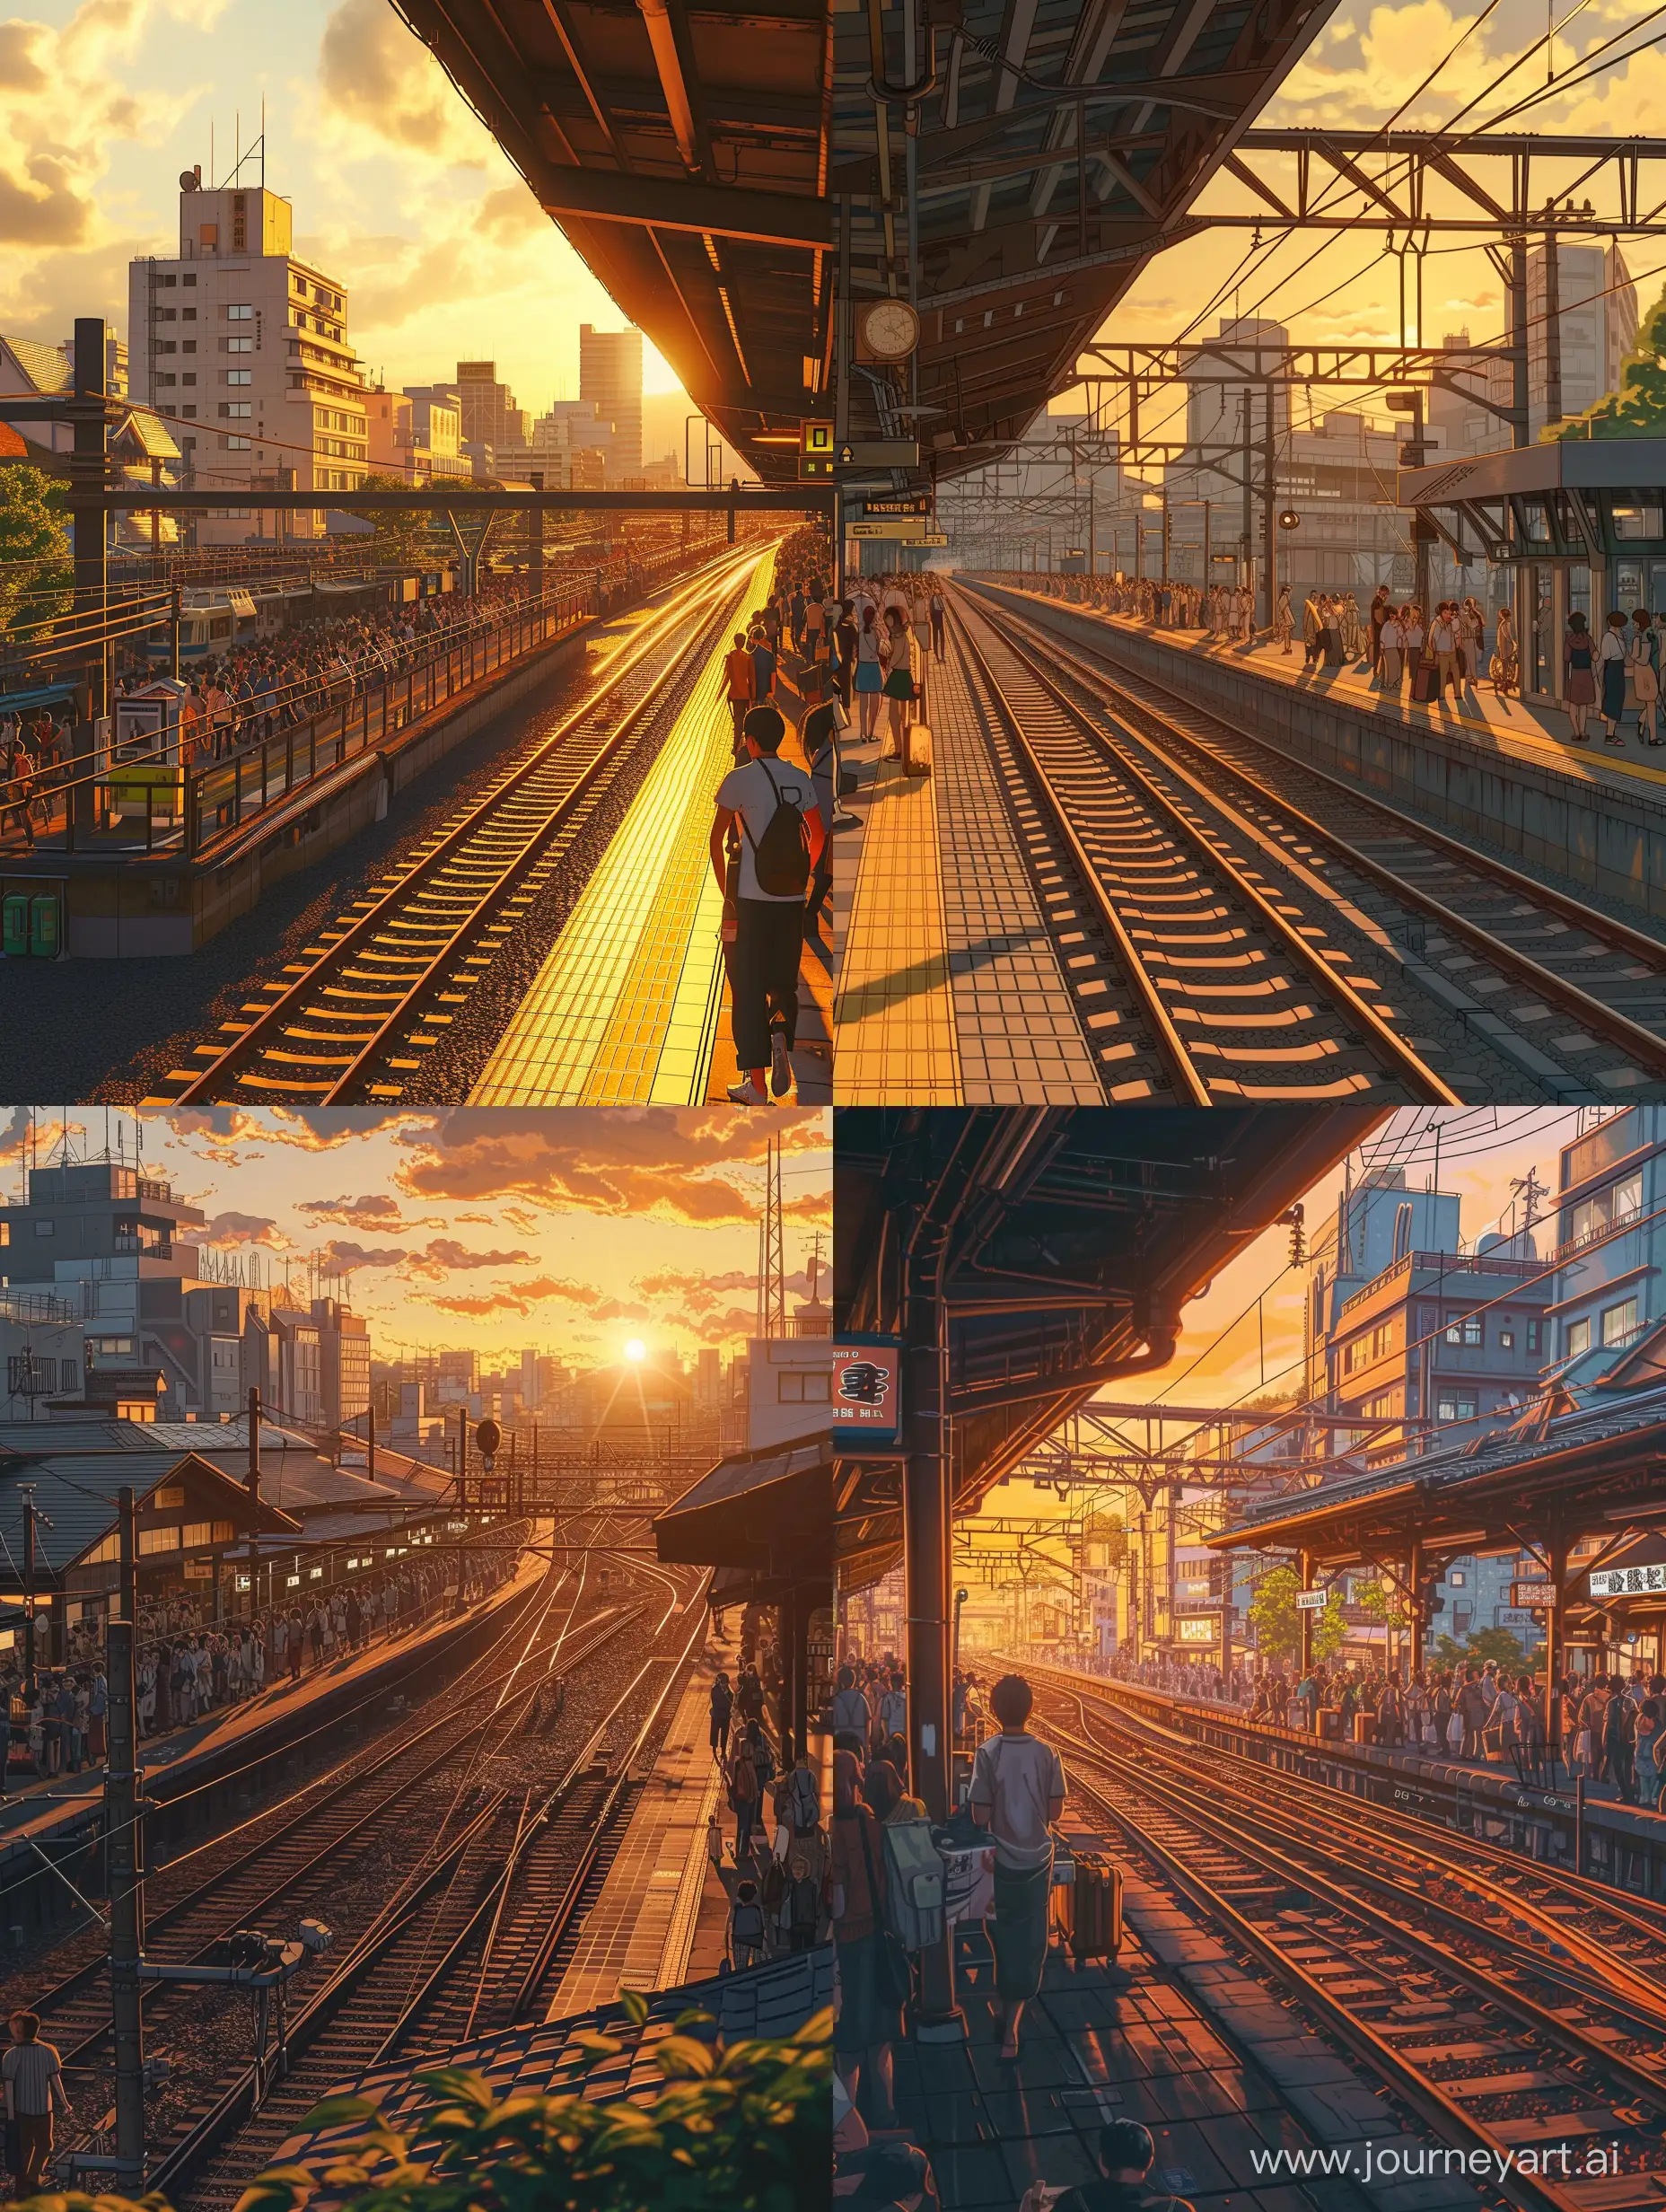 japanese train station in the city, view from the tracks to the crowded station, golden hour, studio ghibli style, very detailed